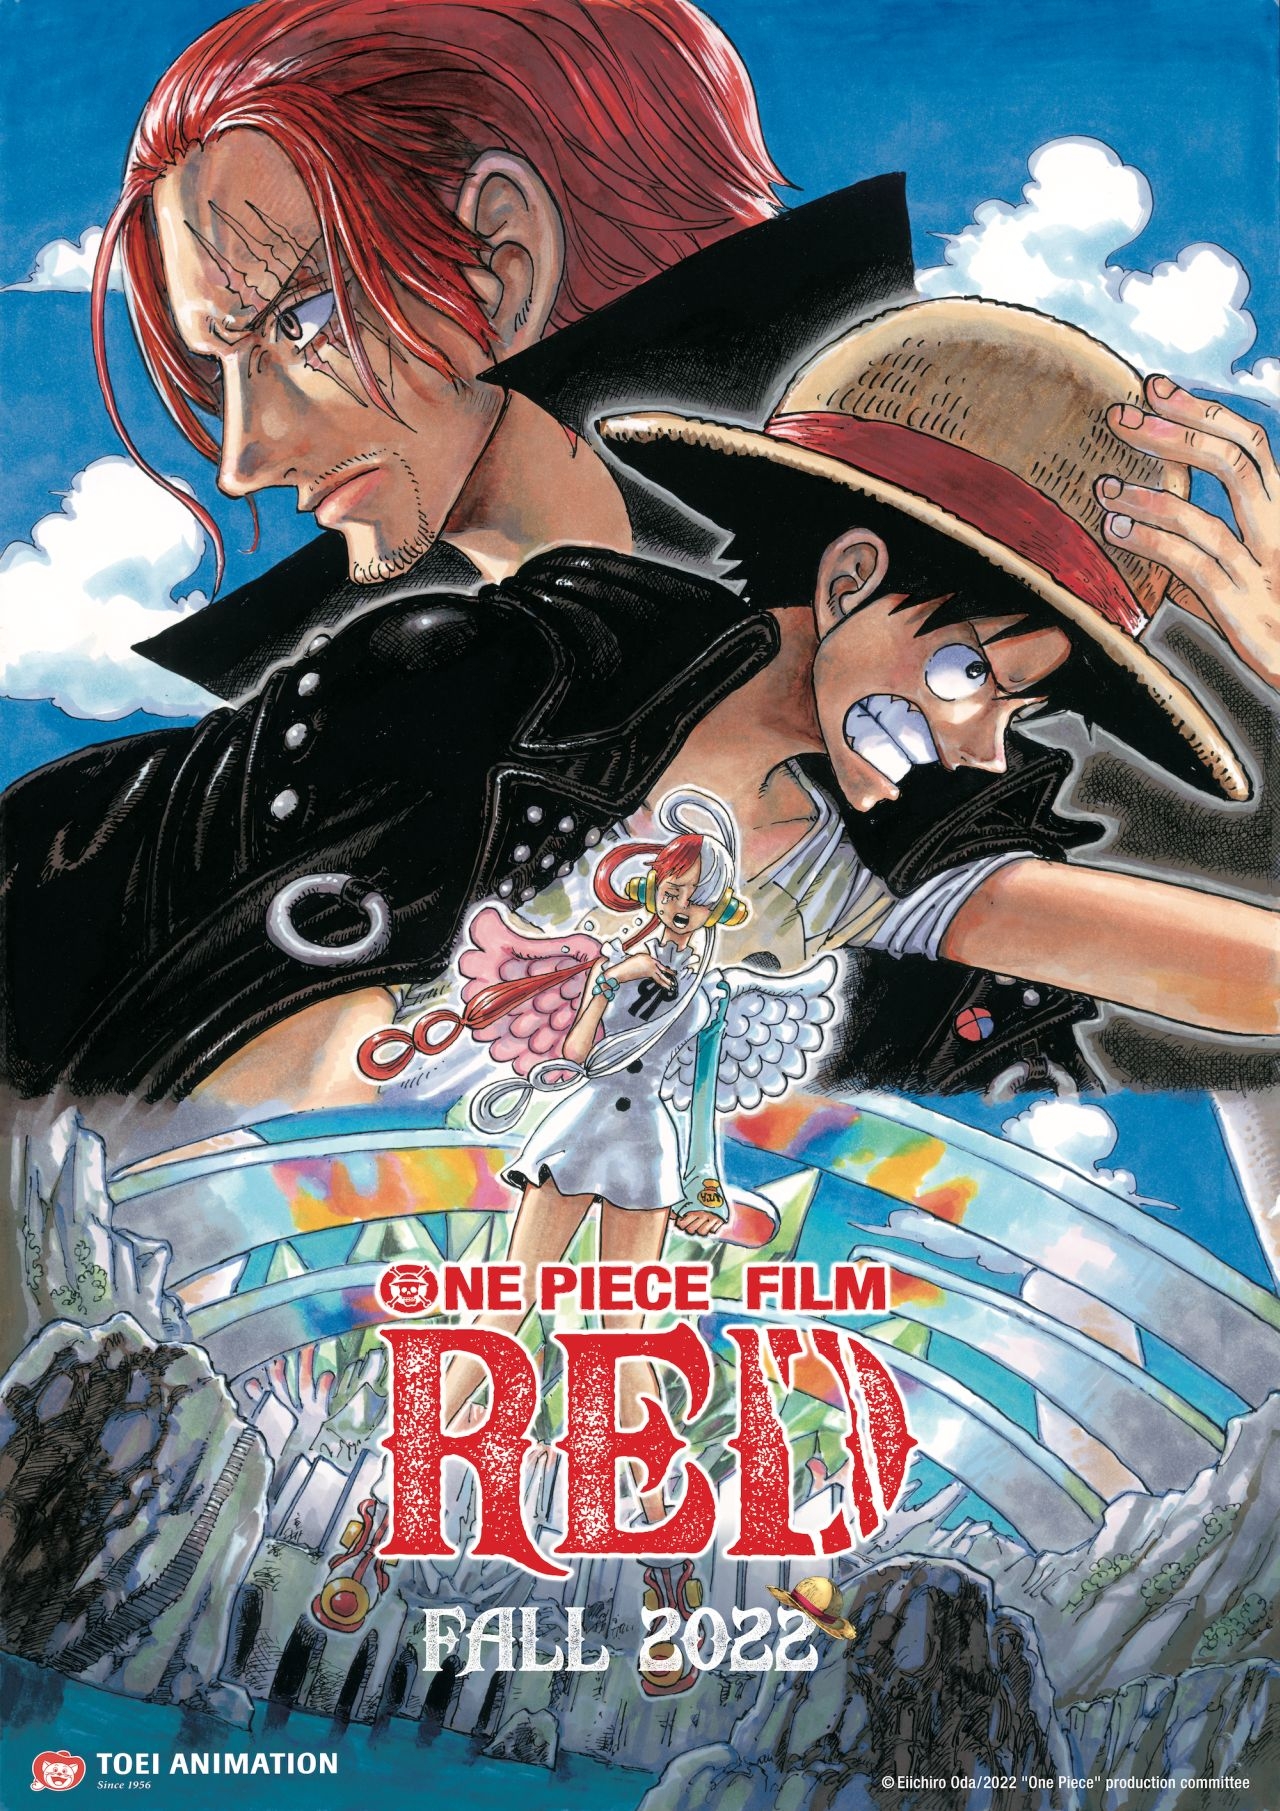 Crunchyroll and Toei Animation Ink 'One Piece Film Red' Distribution Deal |  Animation World Network